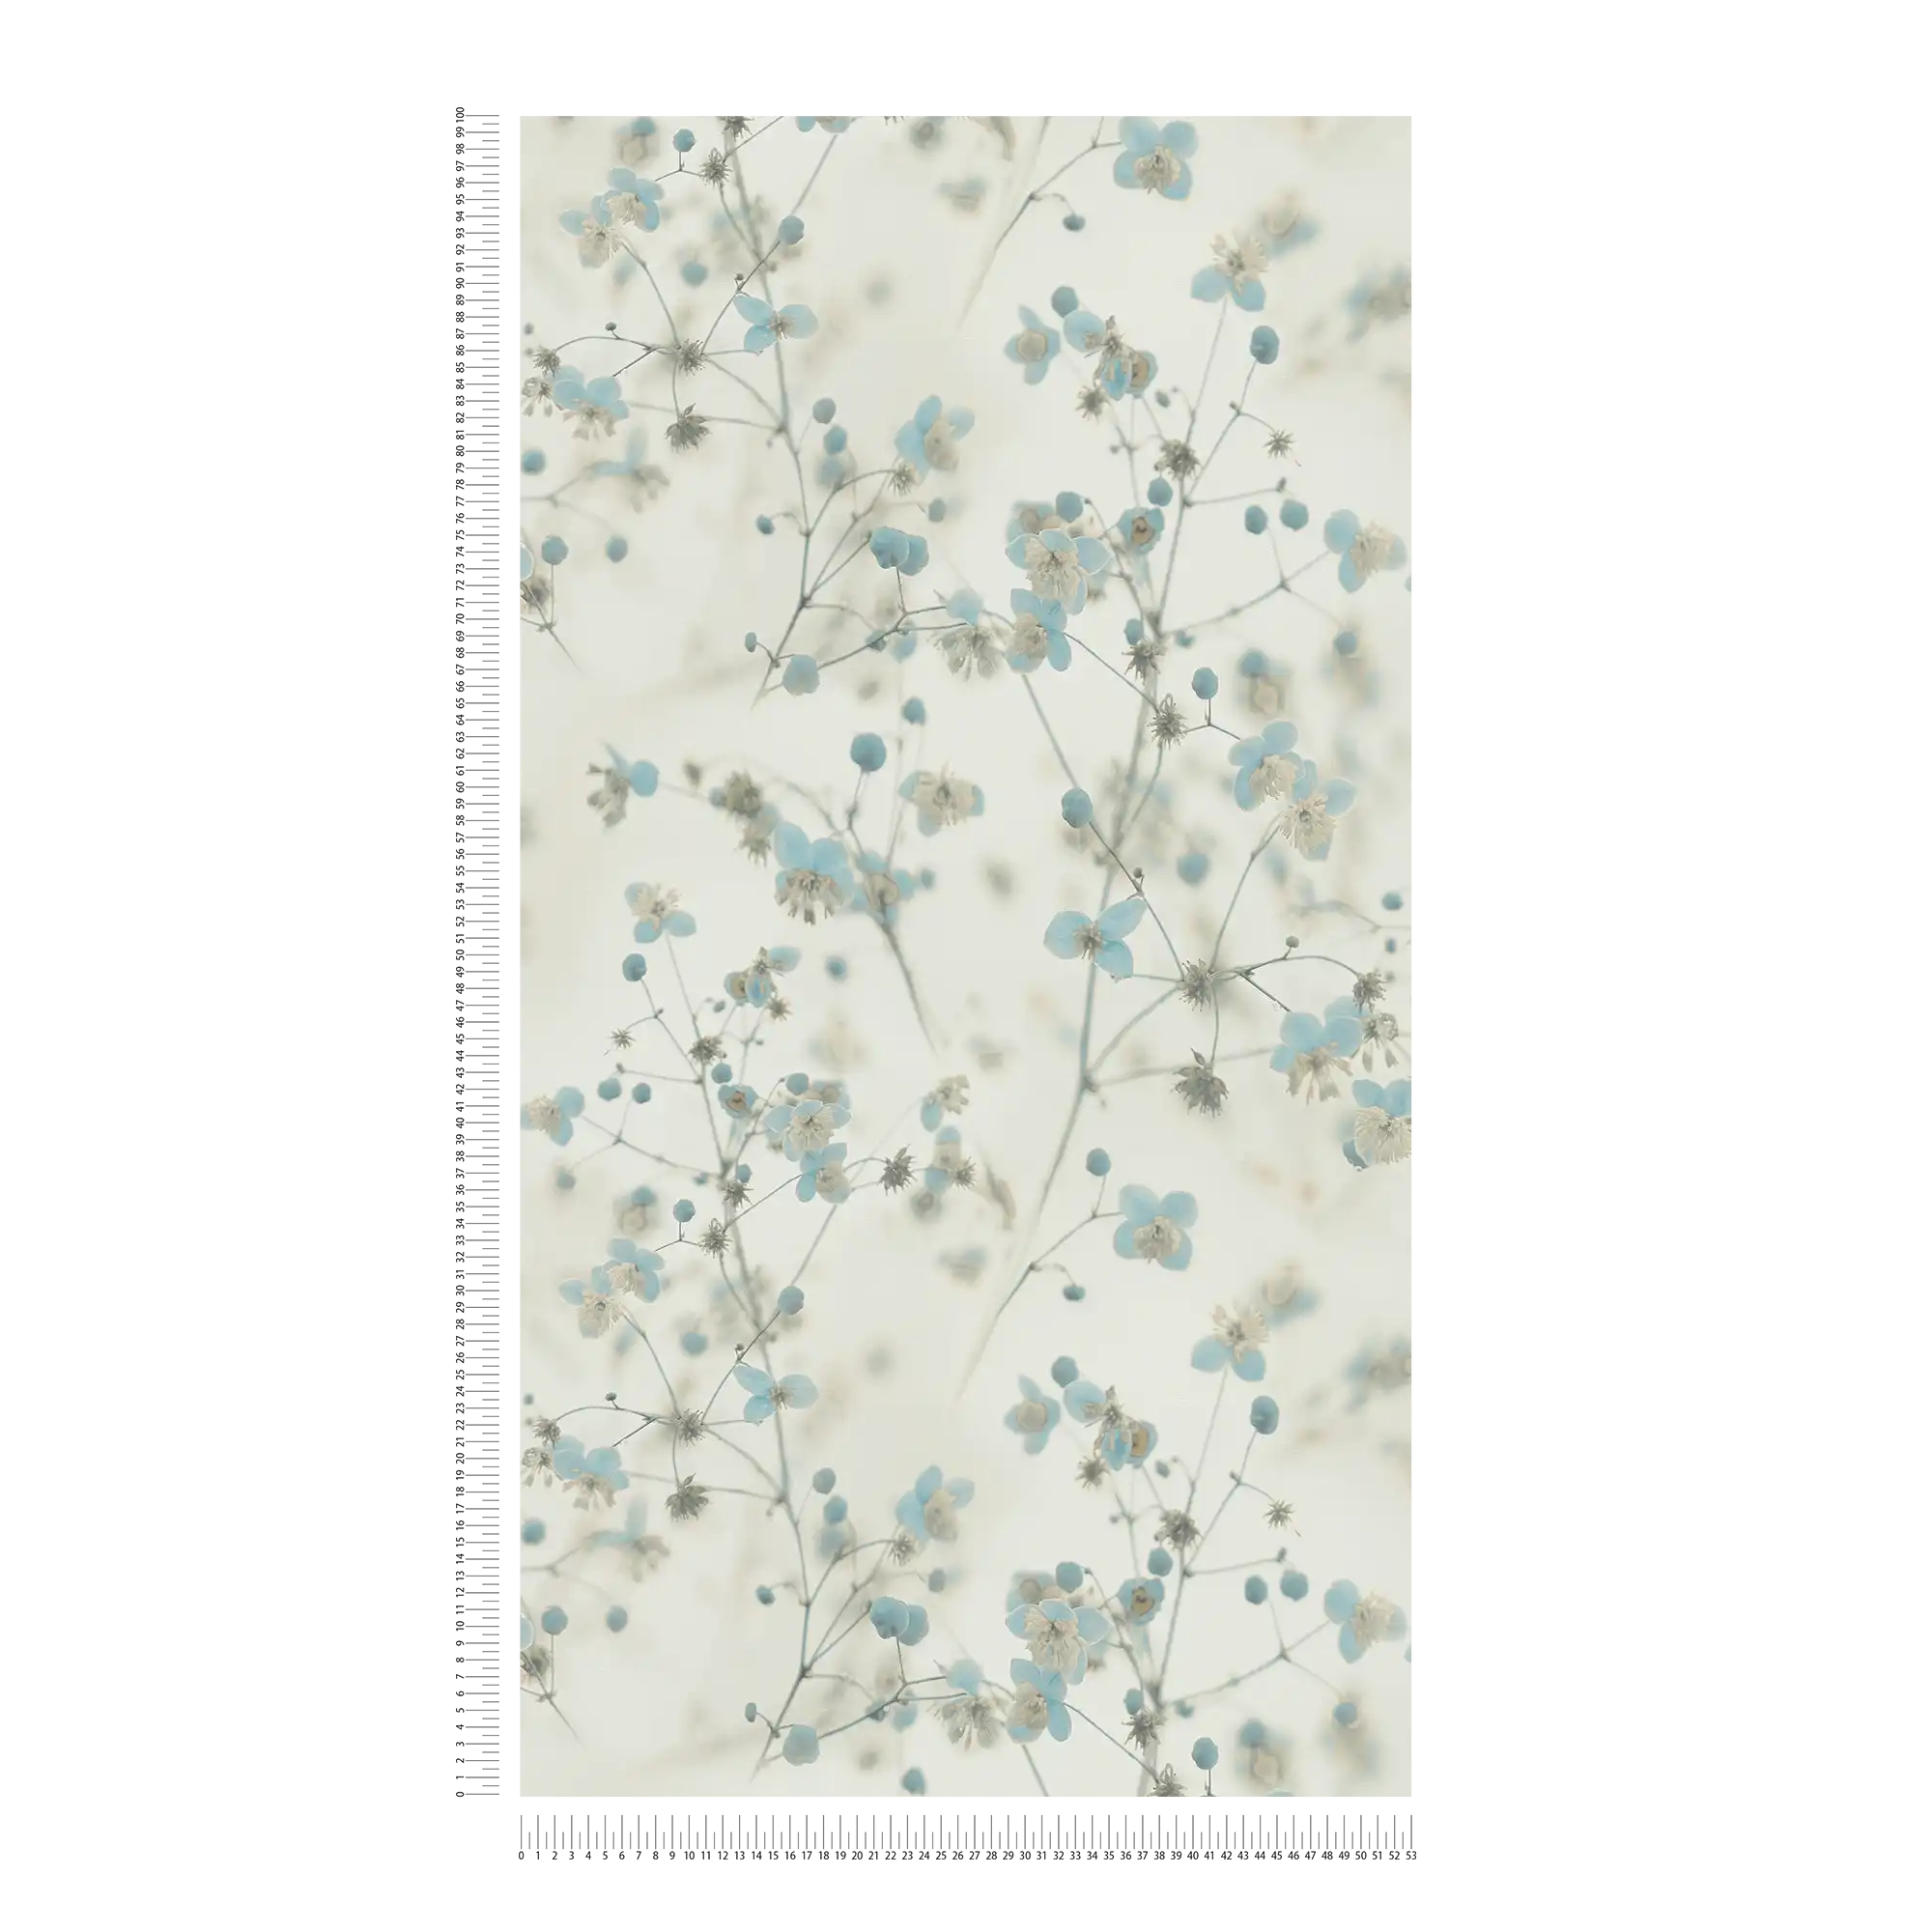             Romantic floral wallpaper photo collage style - grey, blue
        